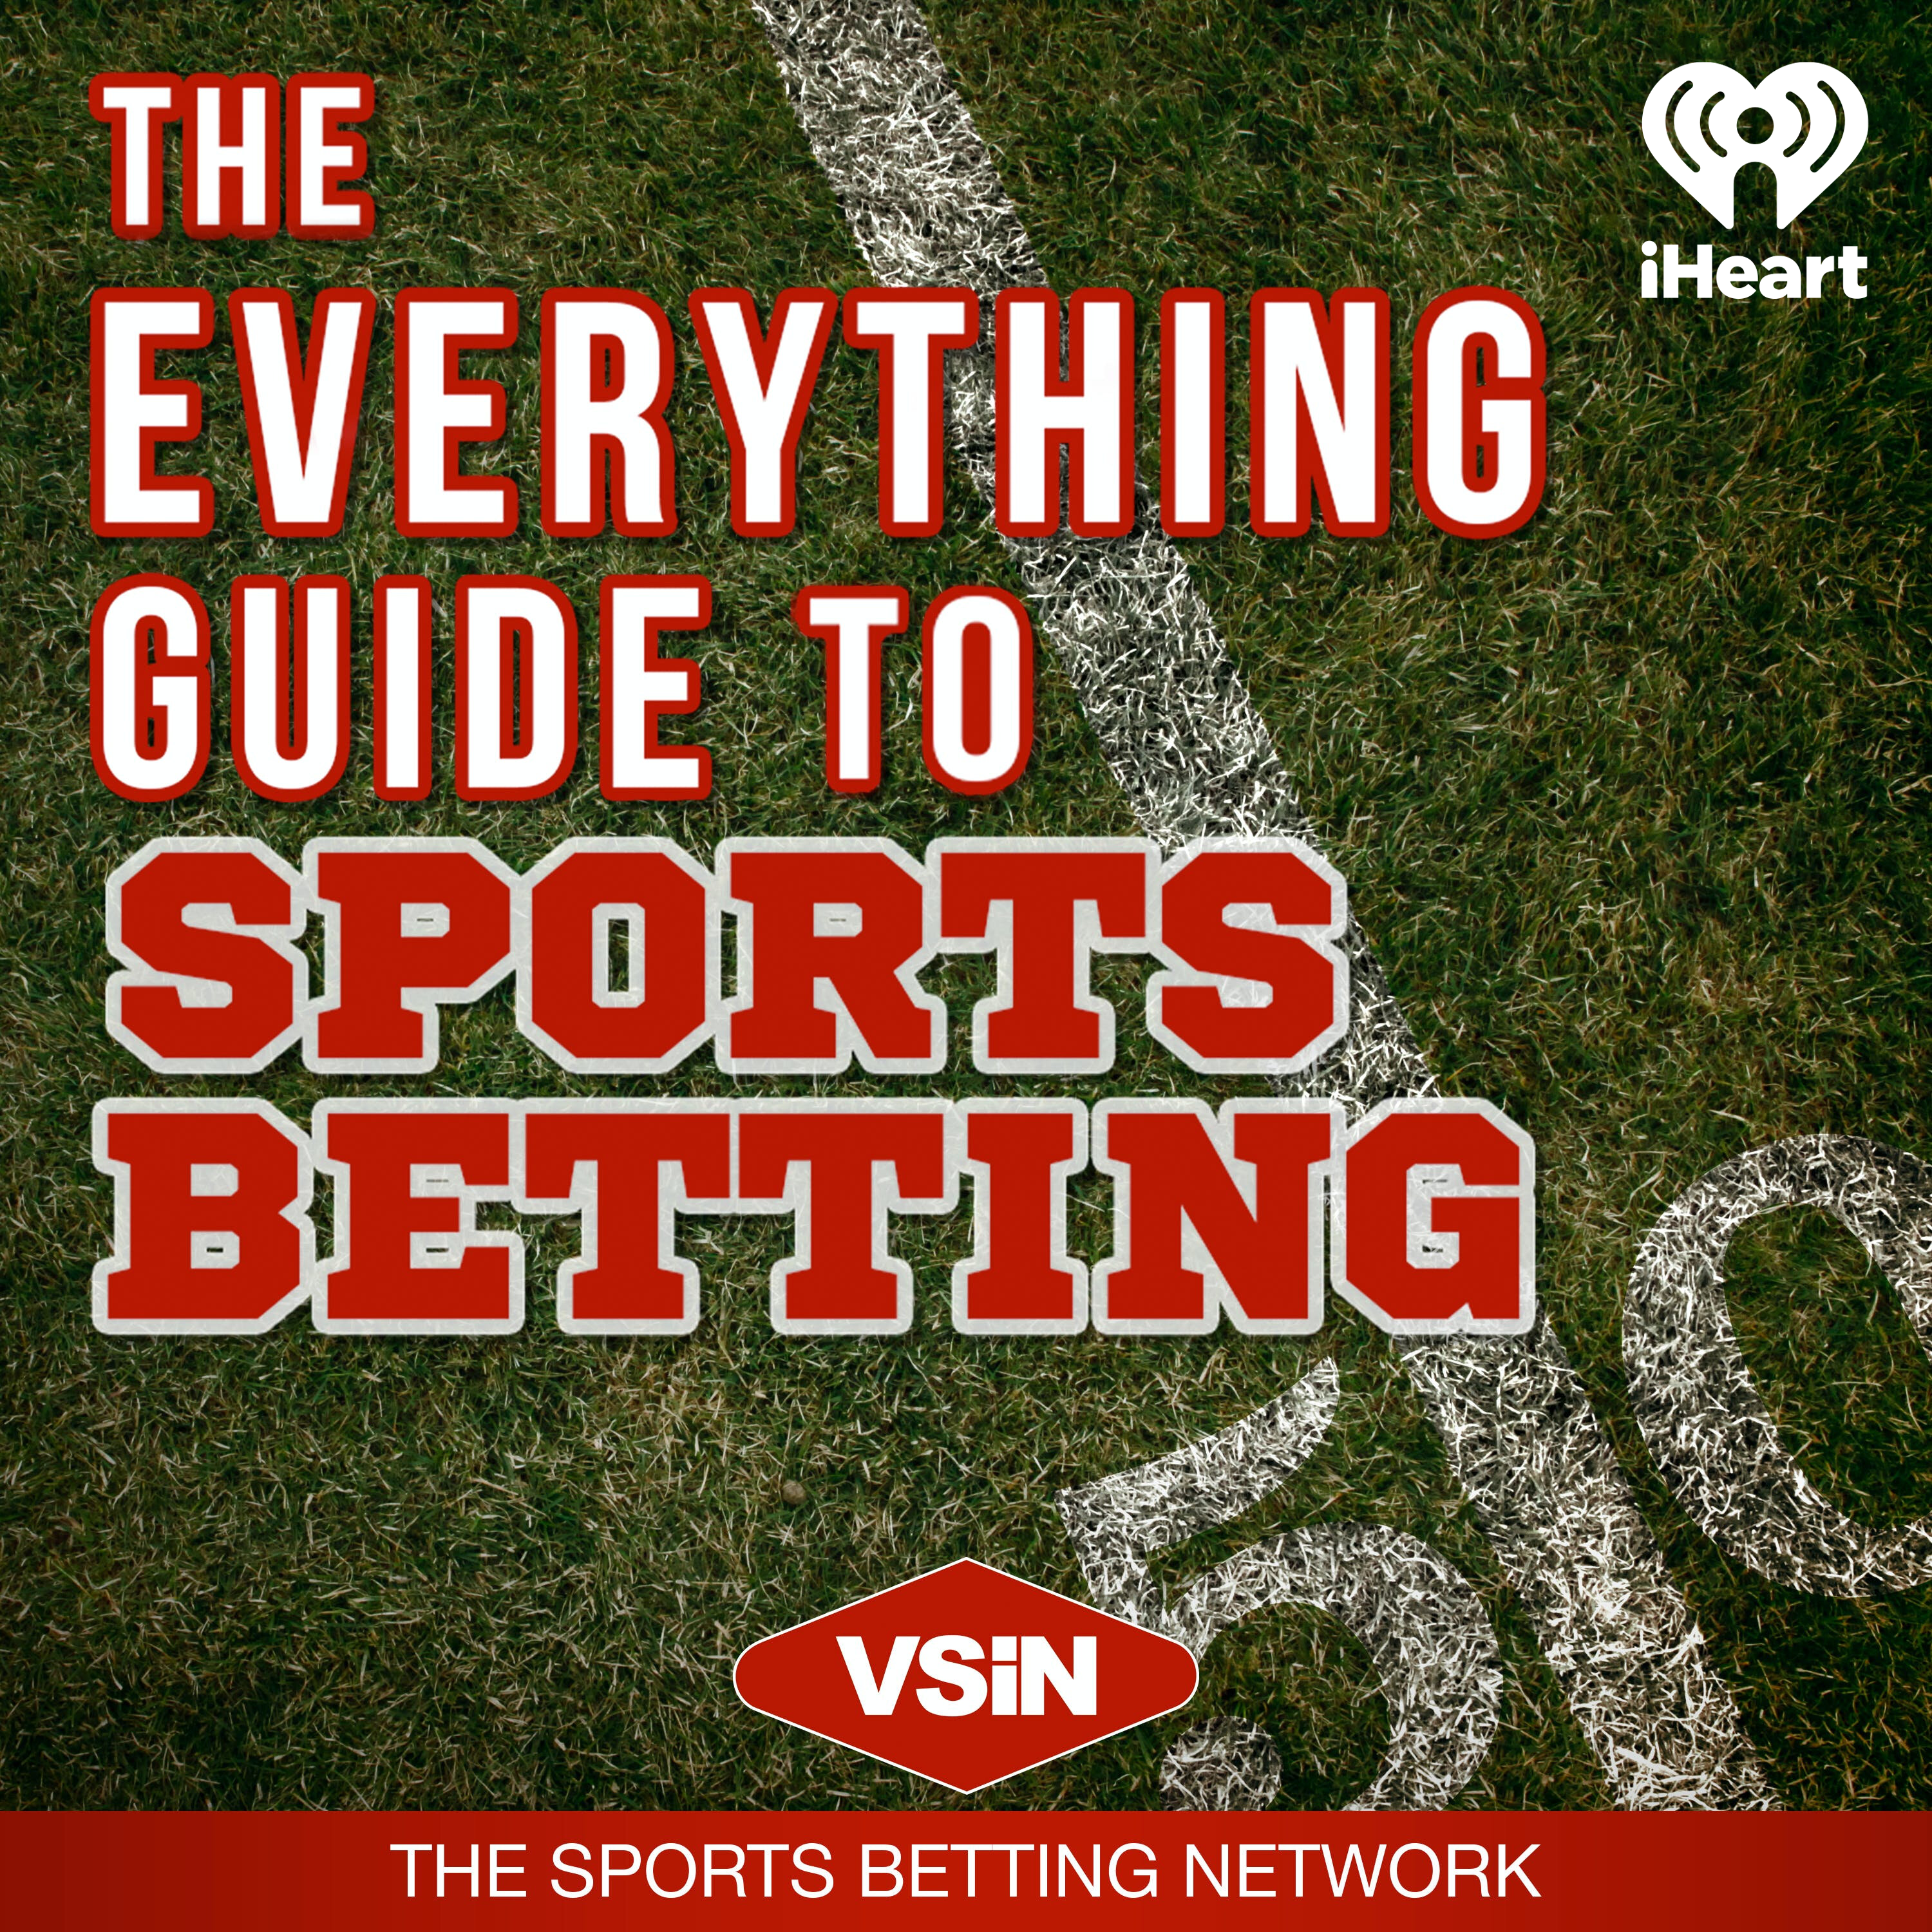 Everything Guide to Sports Betting | November 4, 2020